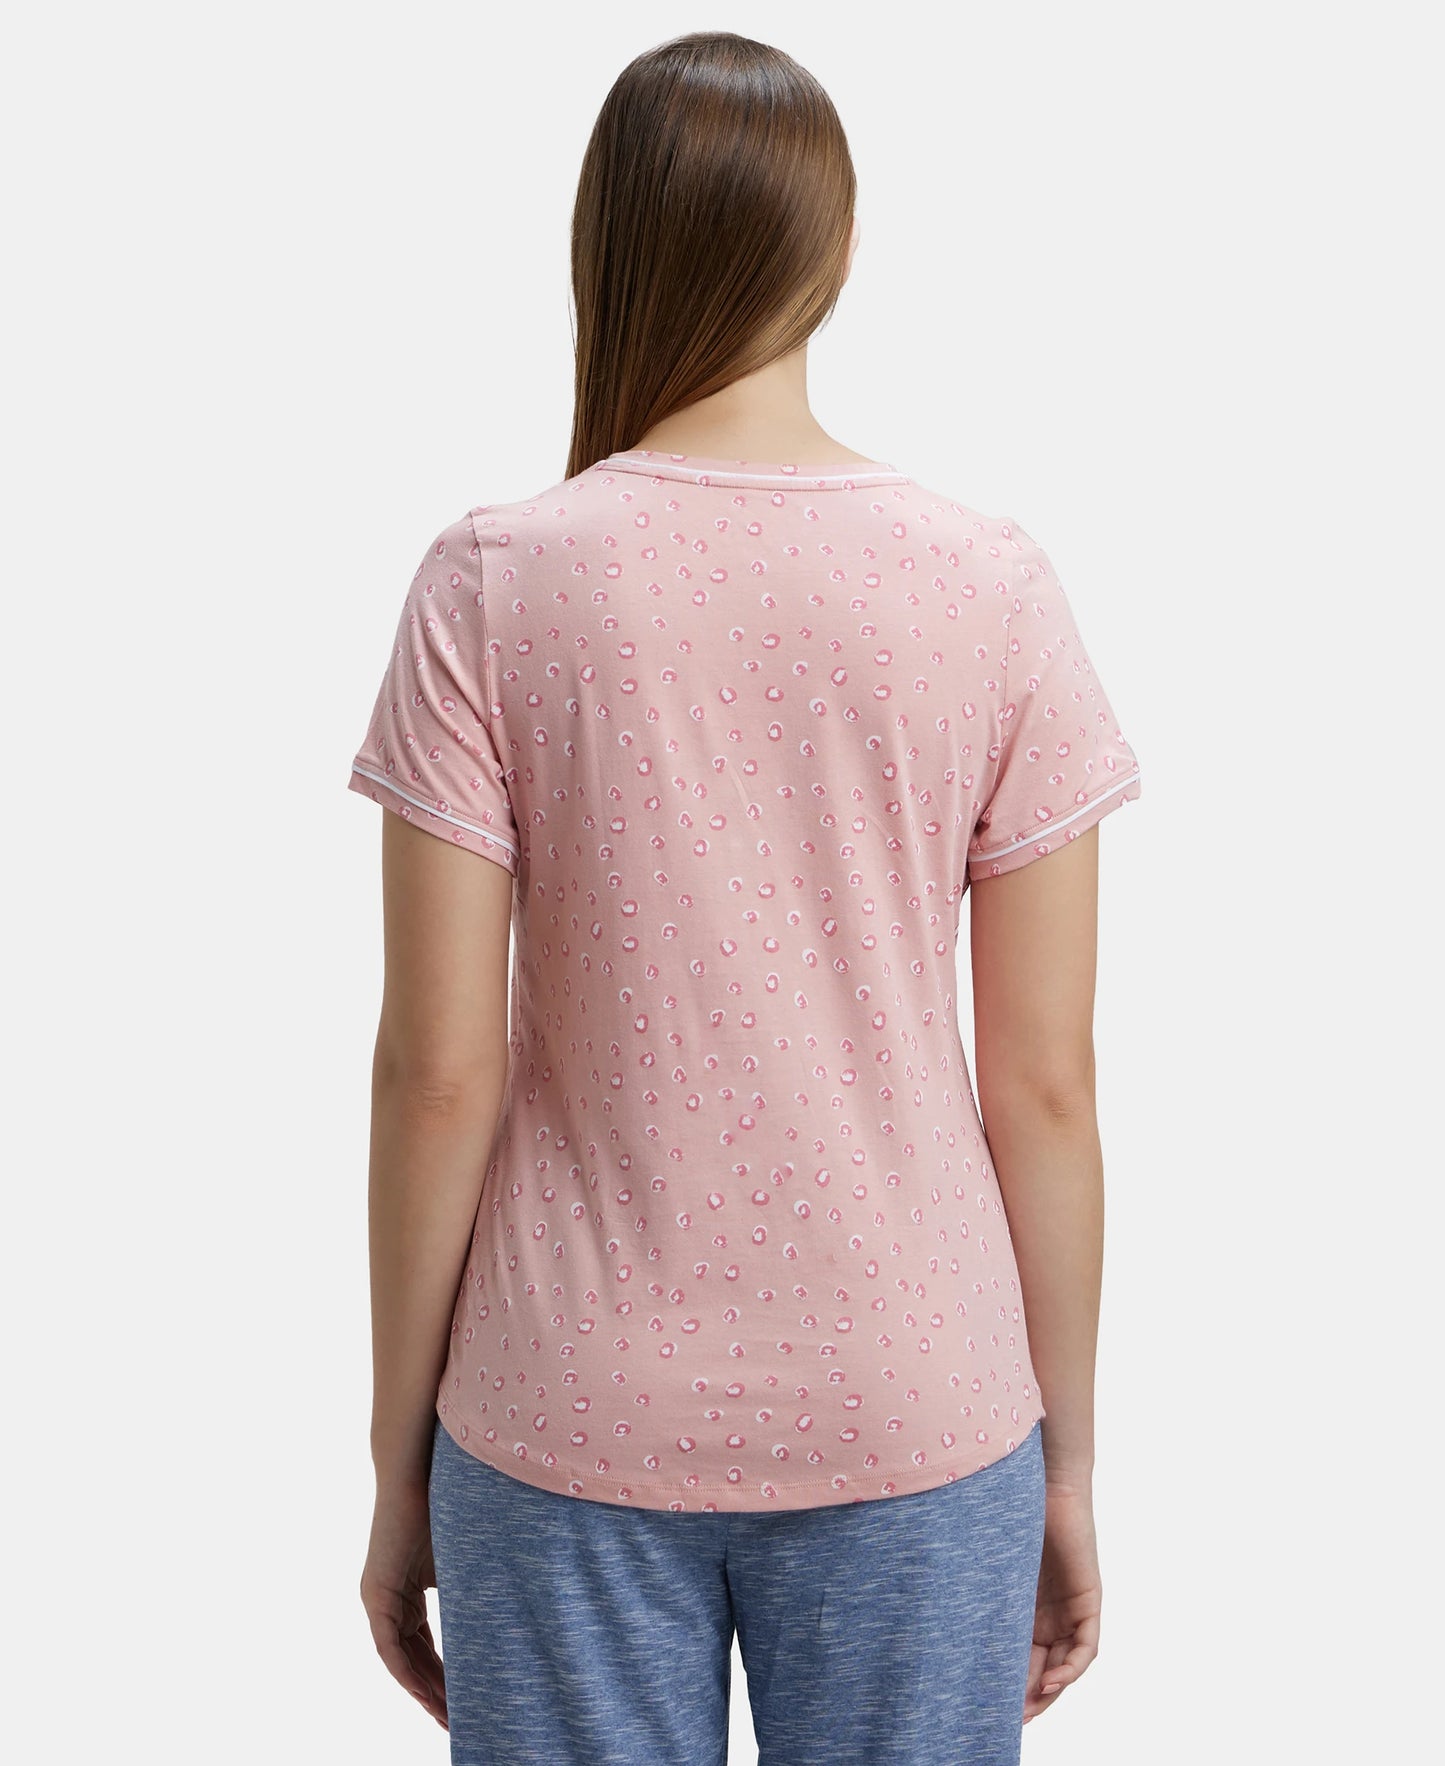 Super Combed Cotton Relaxed Fit Printed Round Neck Half Sleeve T-Shirt with Contrast Piping Design - Blush-3